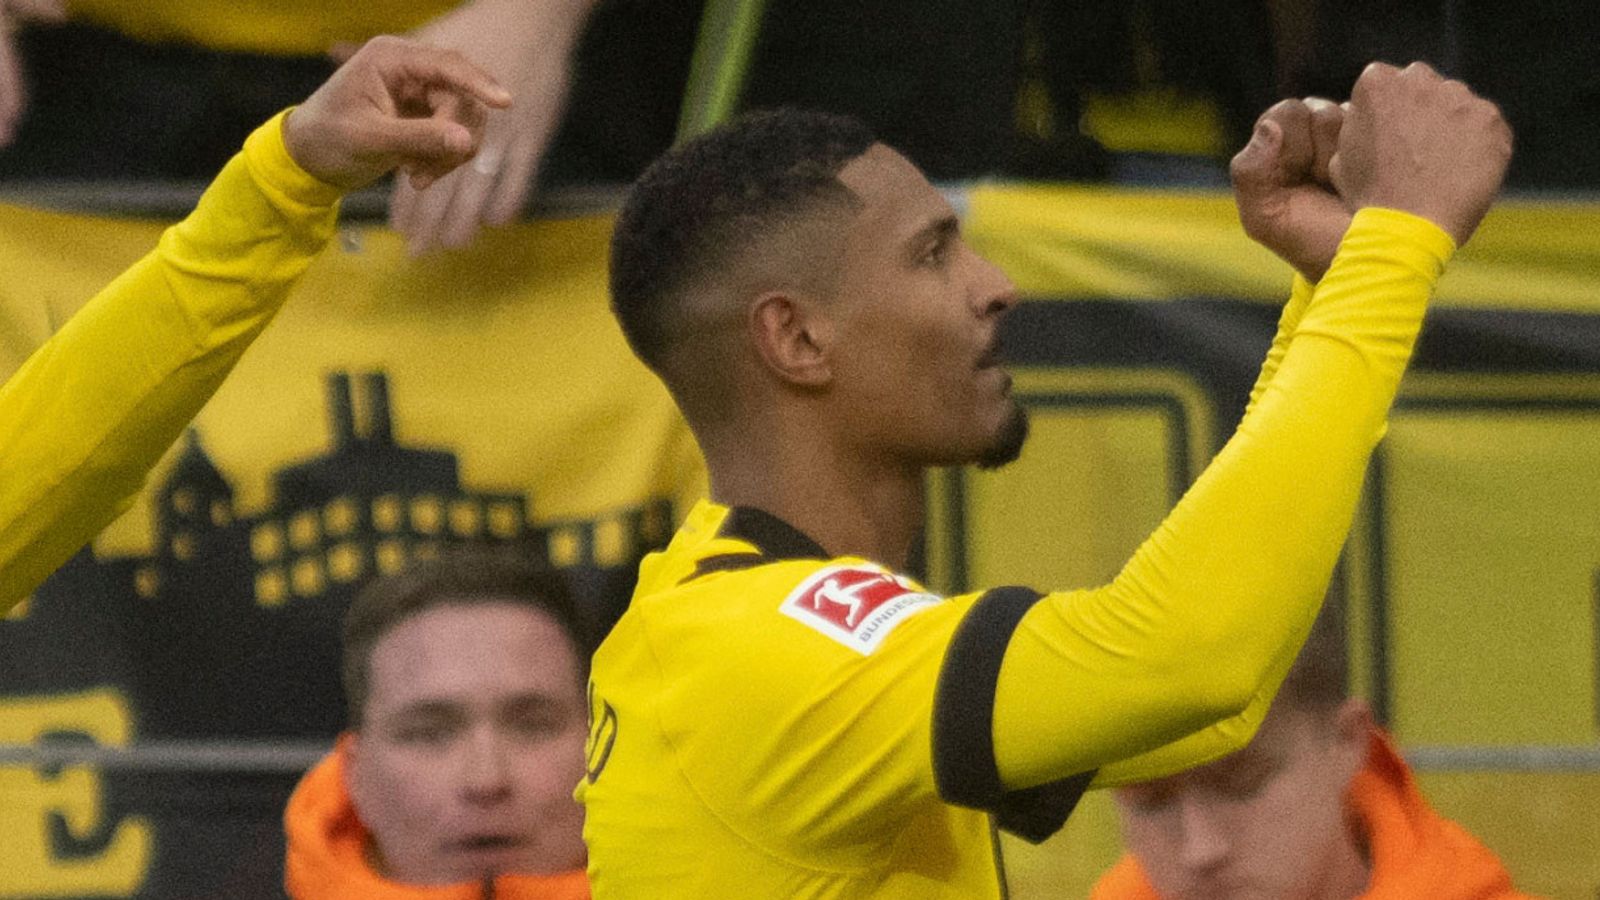 Euro round-up: Borussia Dortmund’s Sebastien Haller scores first goal since return from cancer treatment | Lionel Messi guides PSG to win